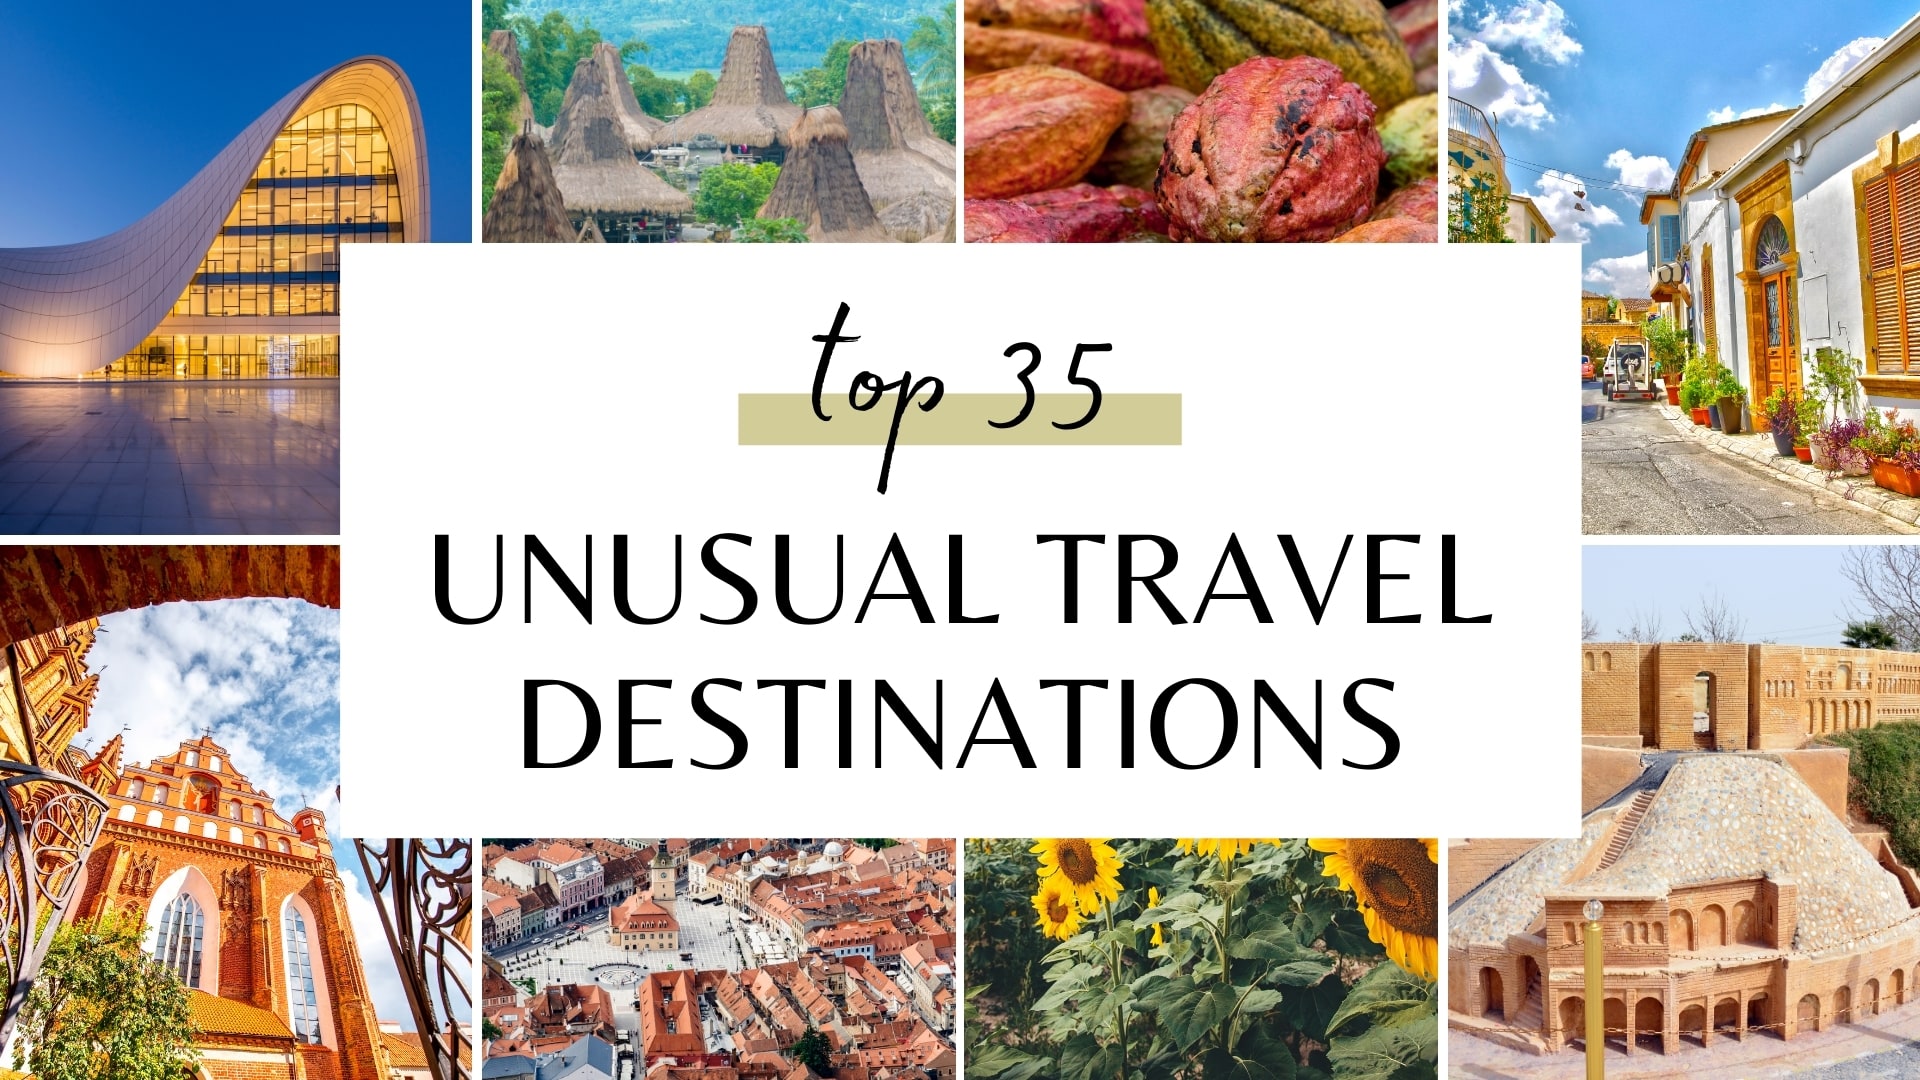 Most Unusual Travel Packing List Ever Seen - Travel Blog